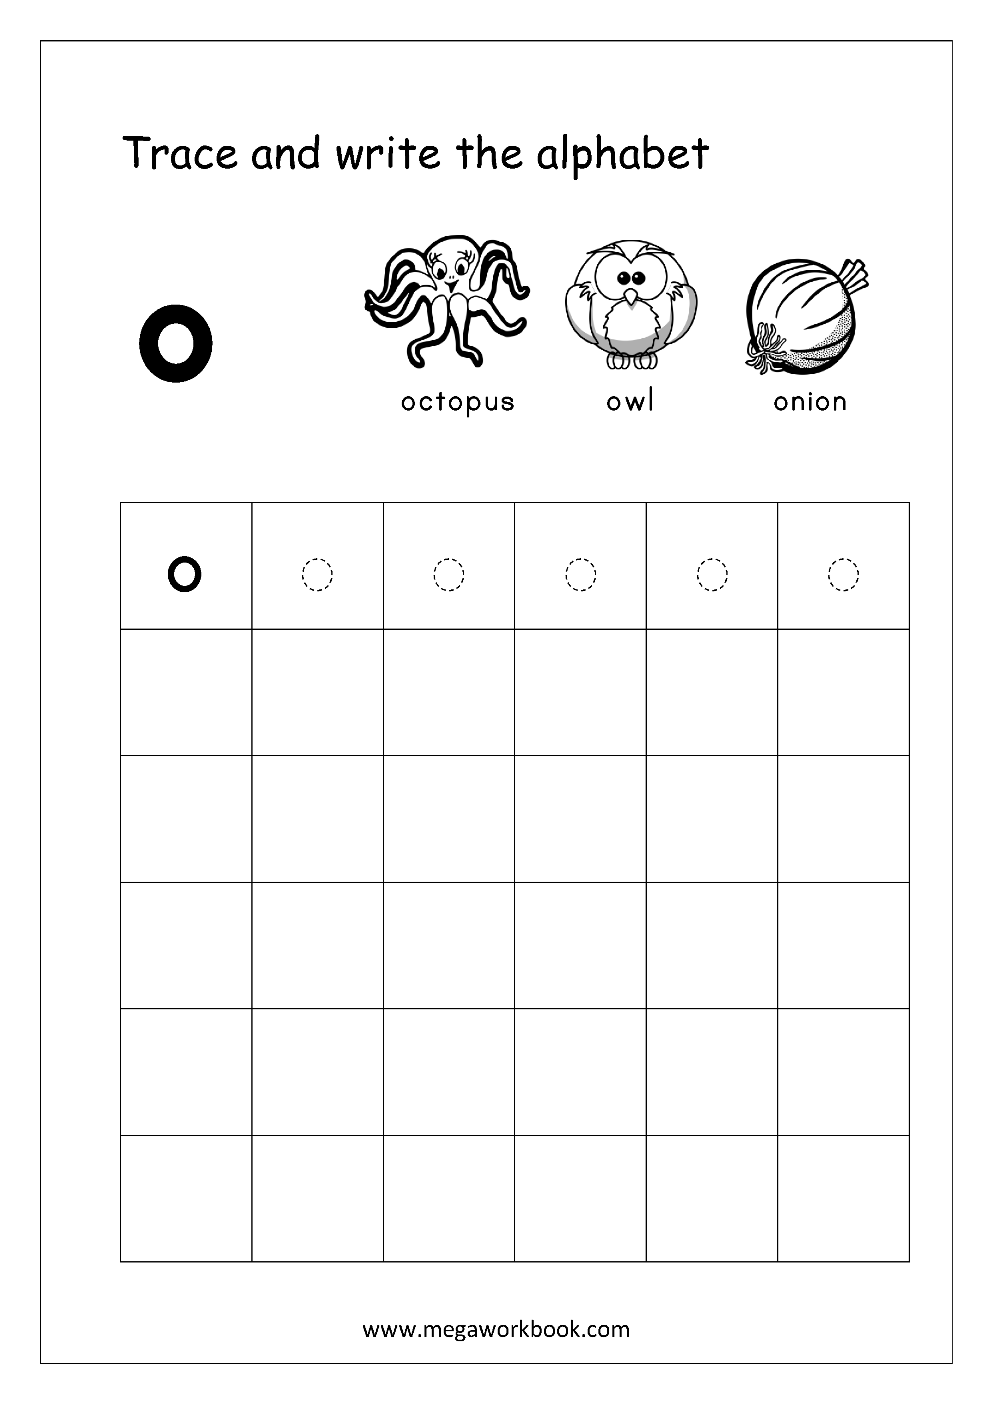 alphabet writing small letters lowercase alphabet writing worksheets alphabet writing practice megaworkbook